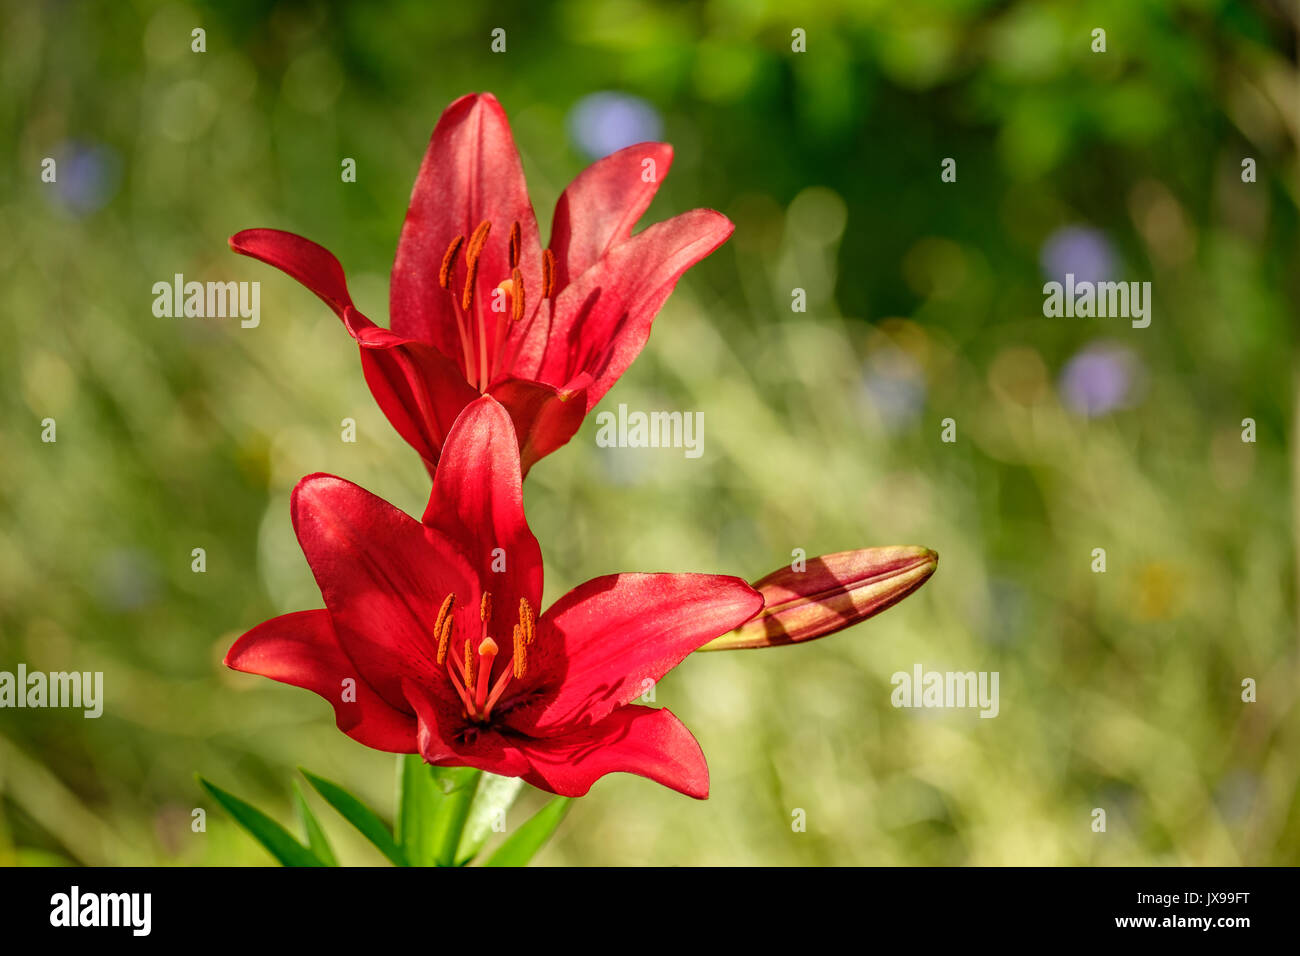 A single red lily plant, lilium, with multiple flowers in a garden setting. Stock Photo